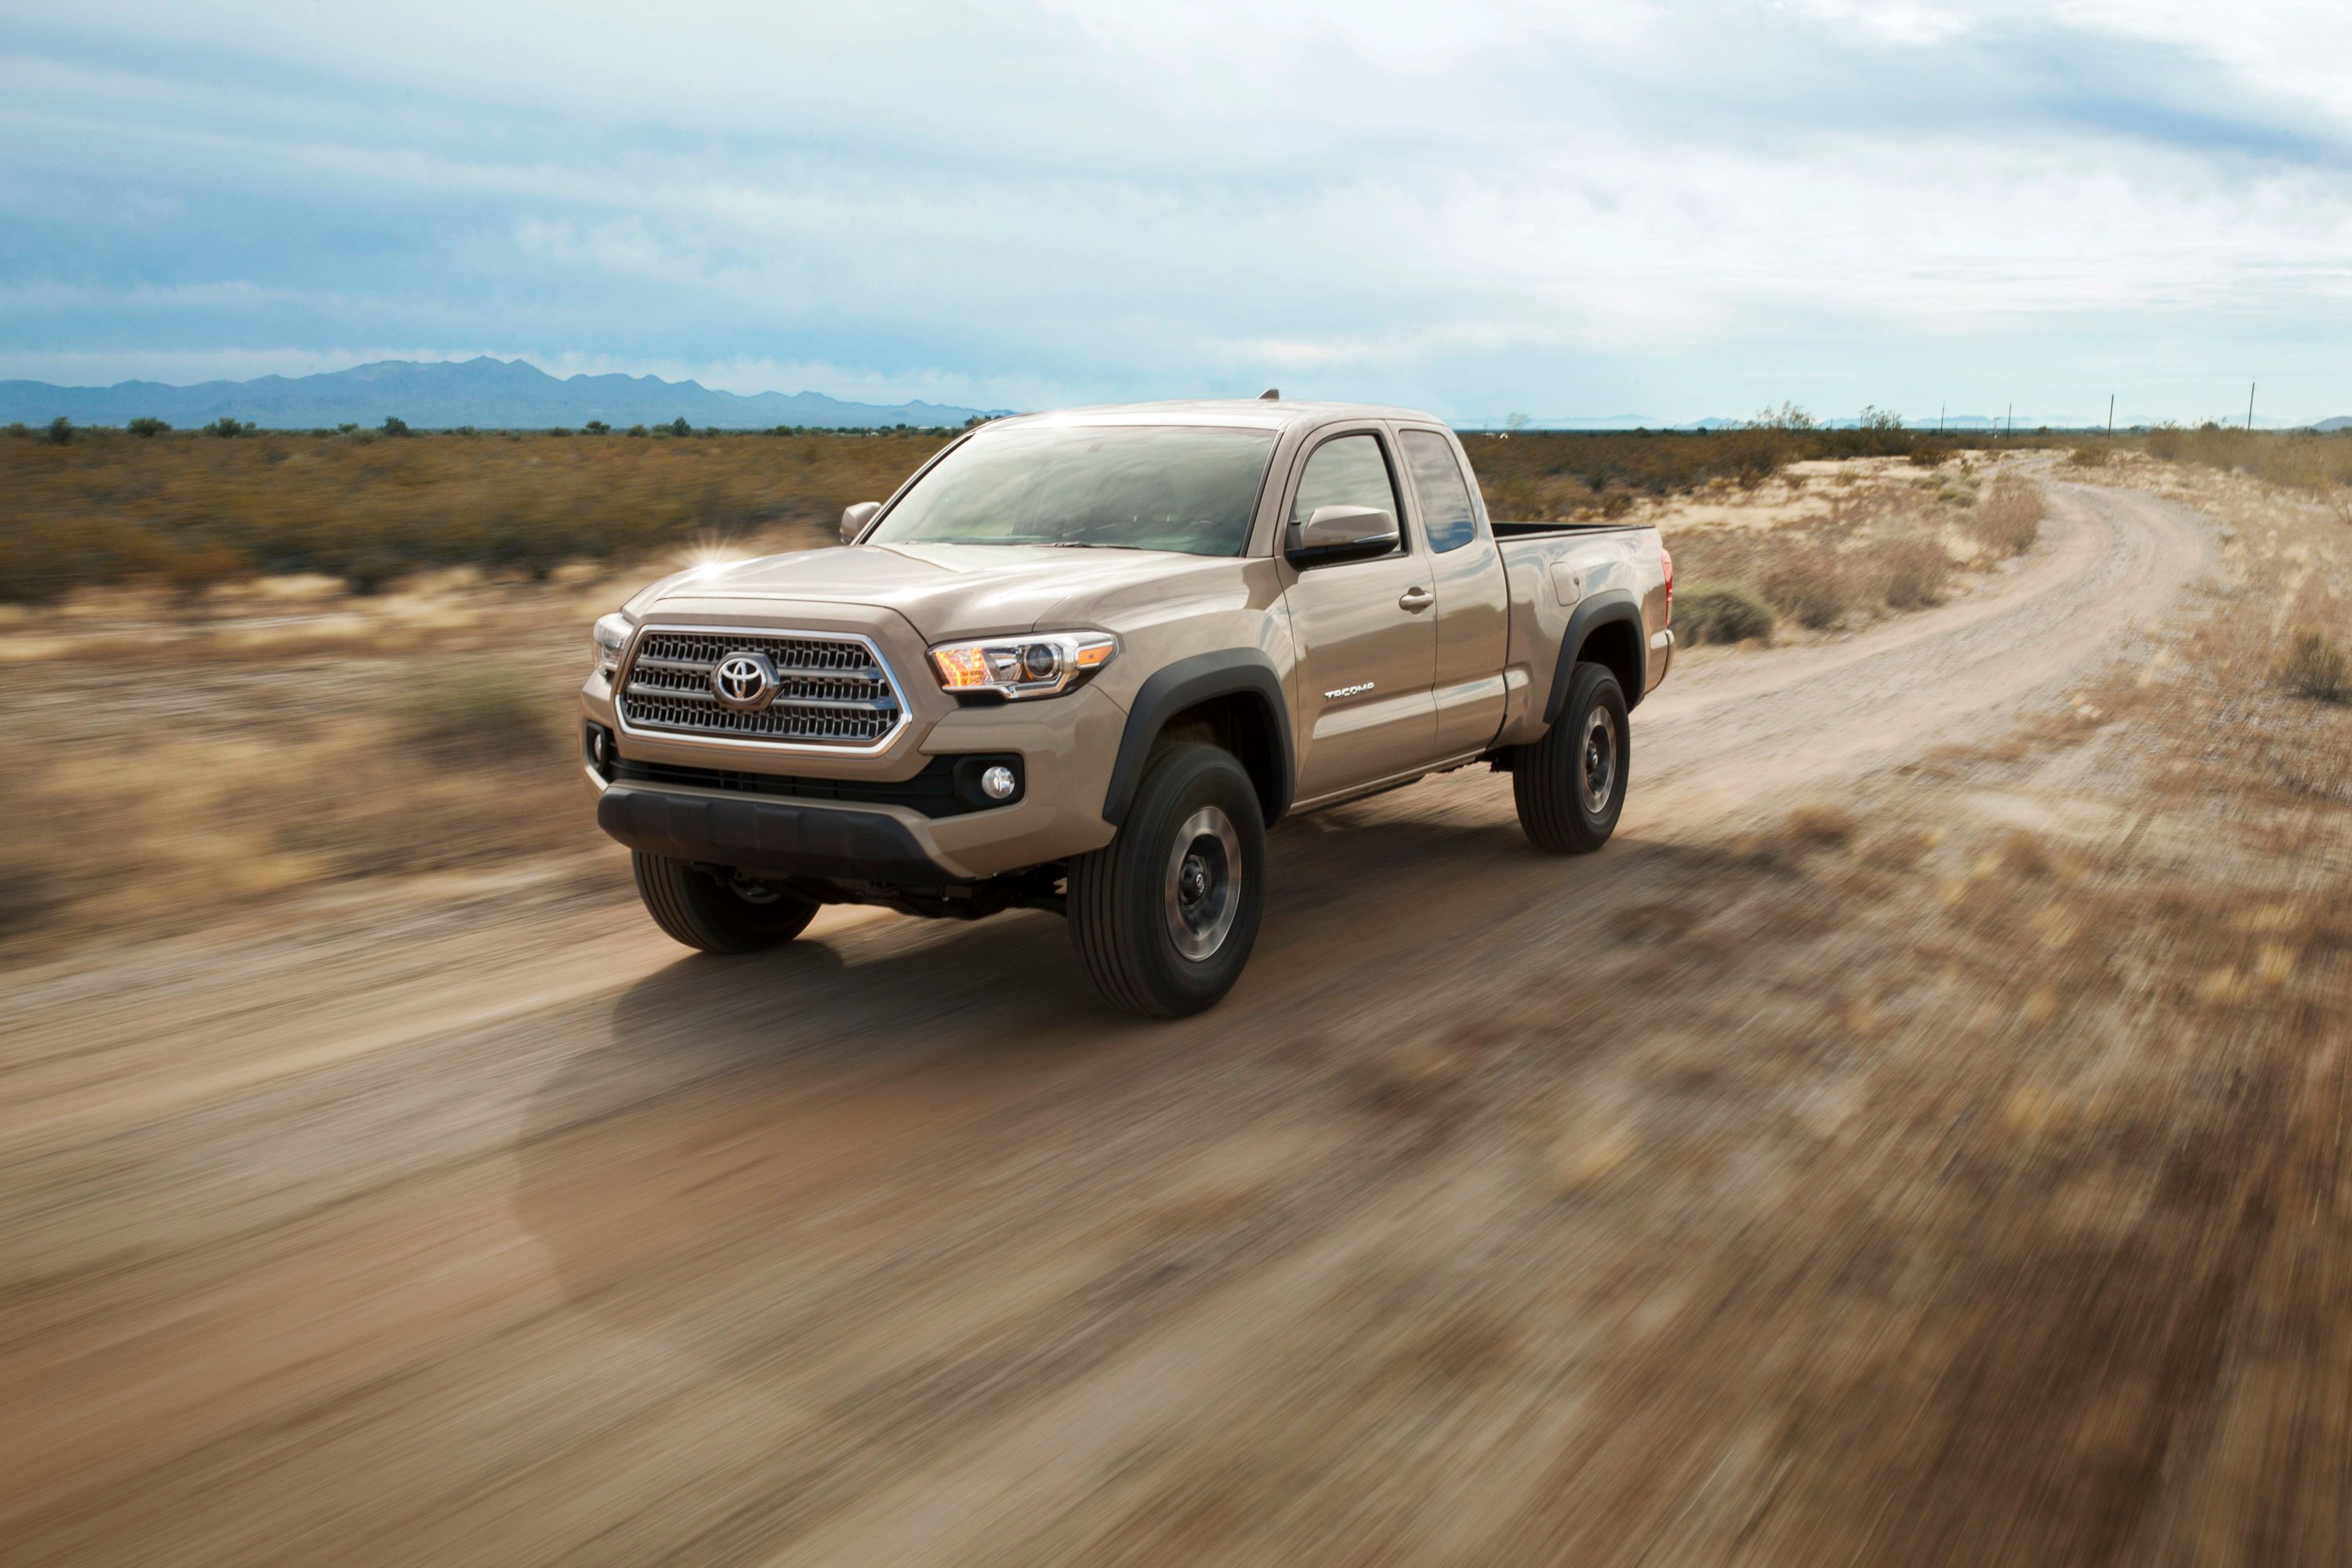 2015 No Diesel Version For The Redesigned Toyota Tacoma